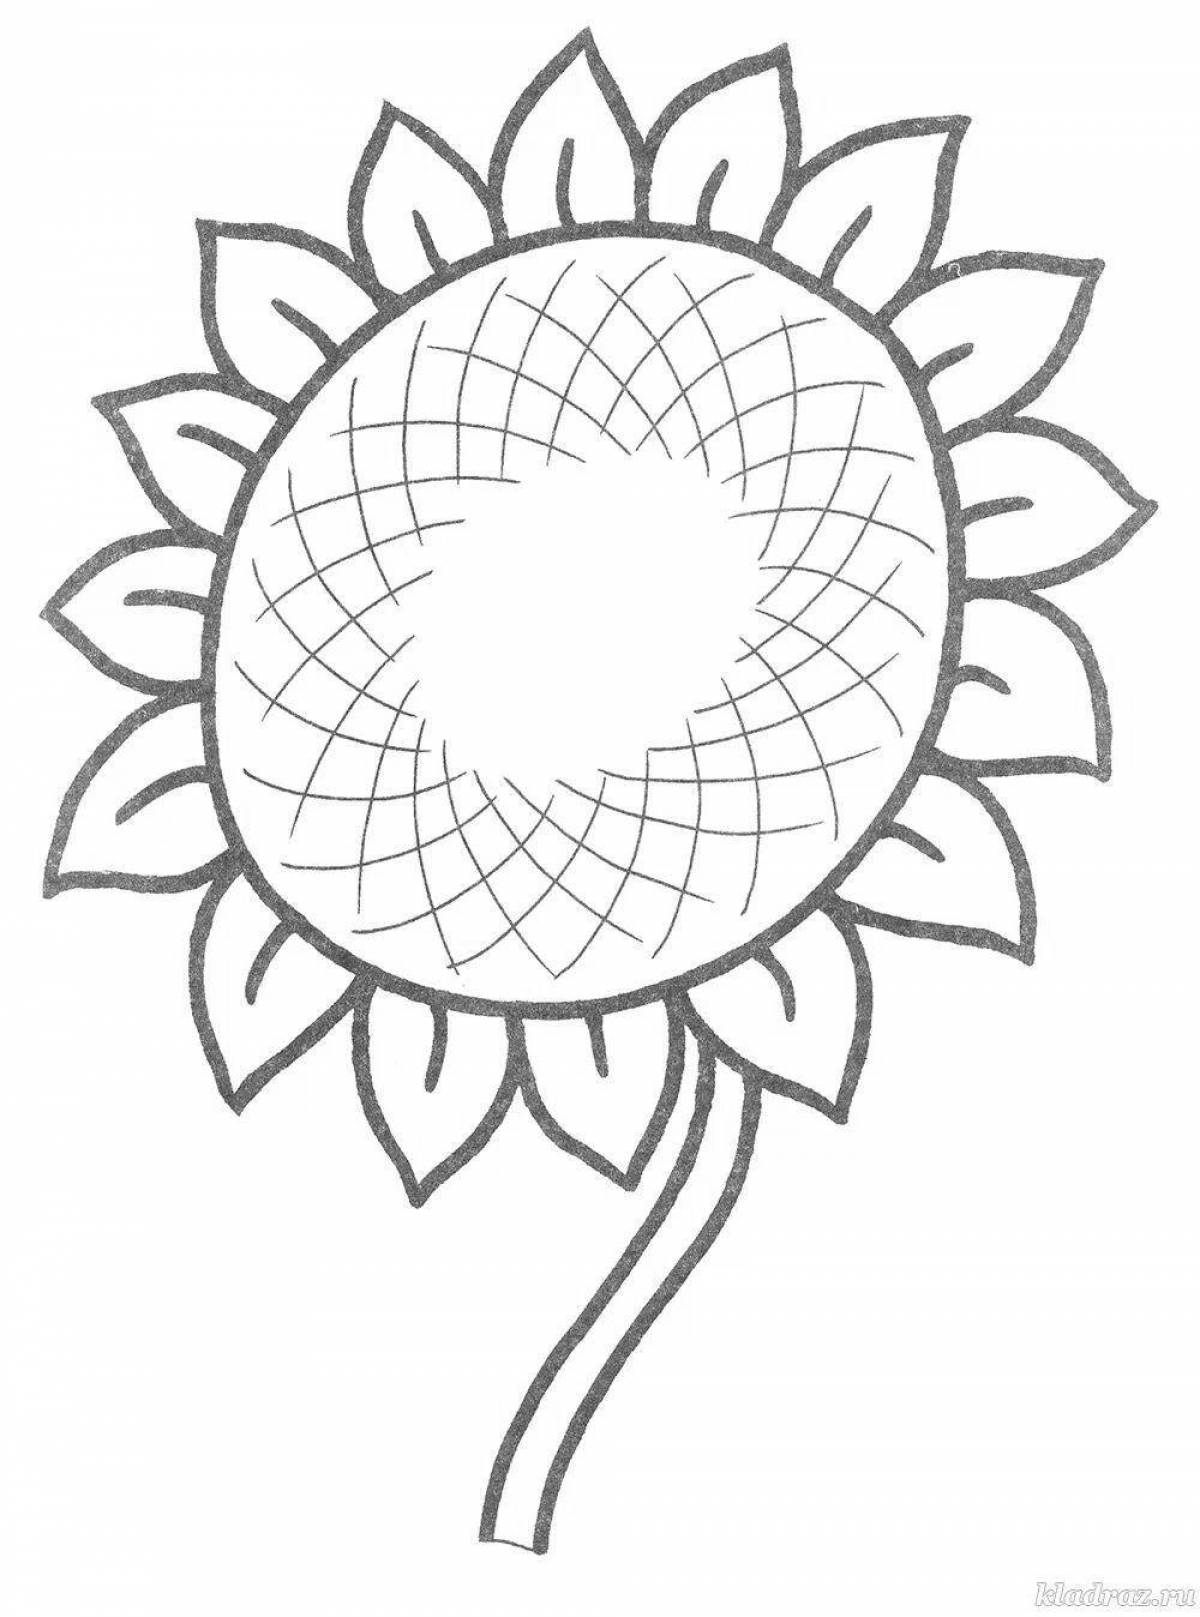 Outstanding sunflower coloring book for 2-3 year olds